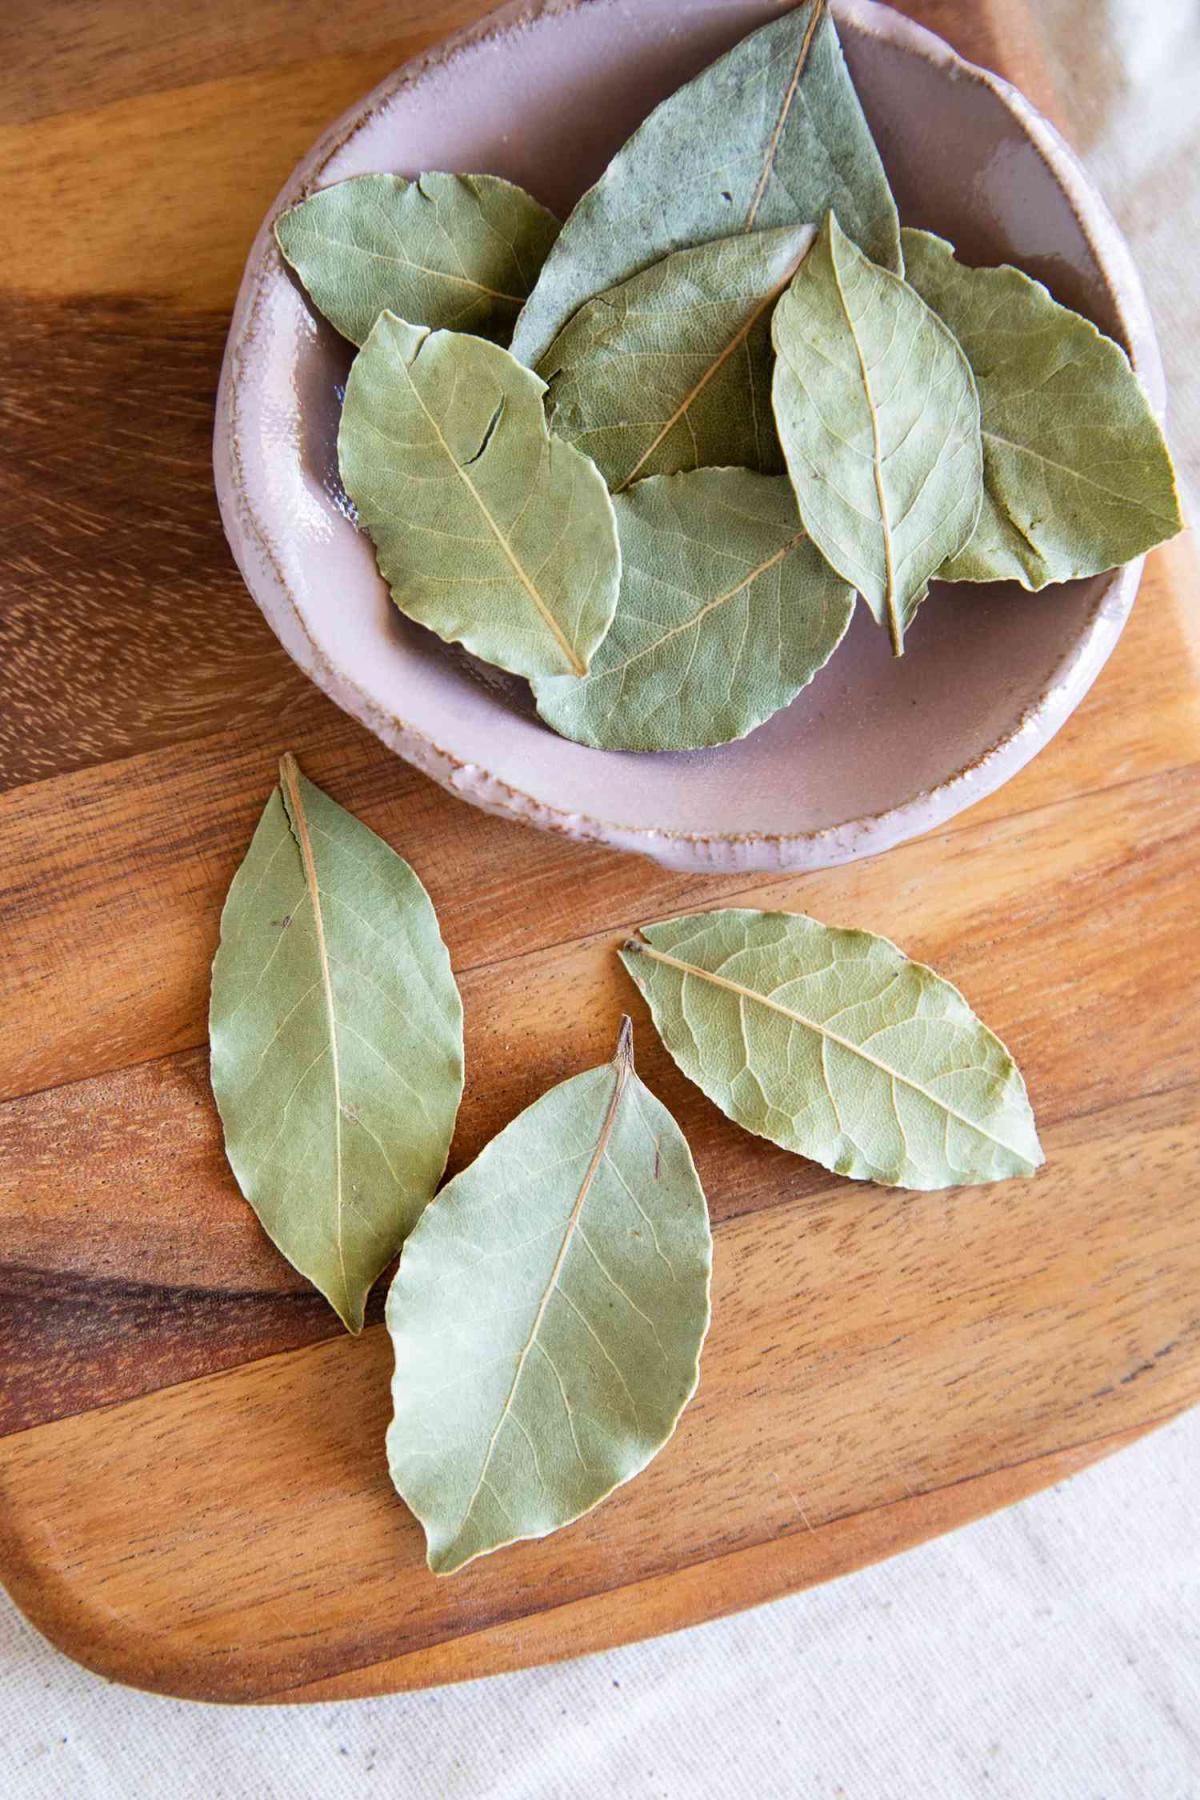 Spice of the Month for January is Bay Leaves.